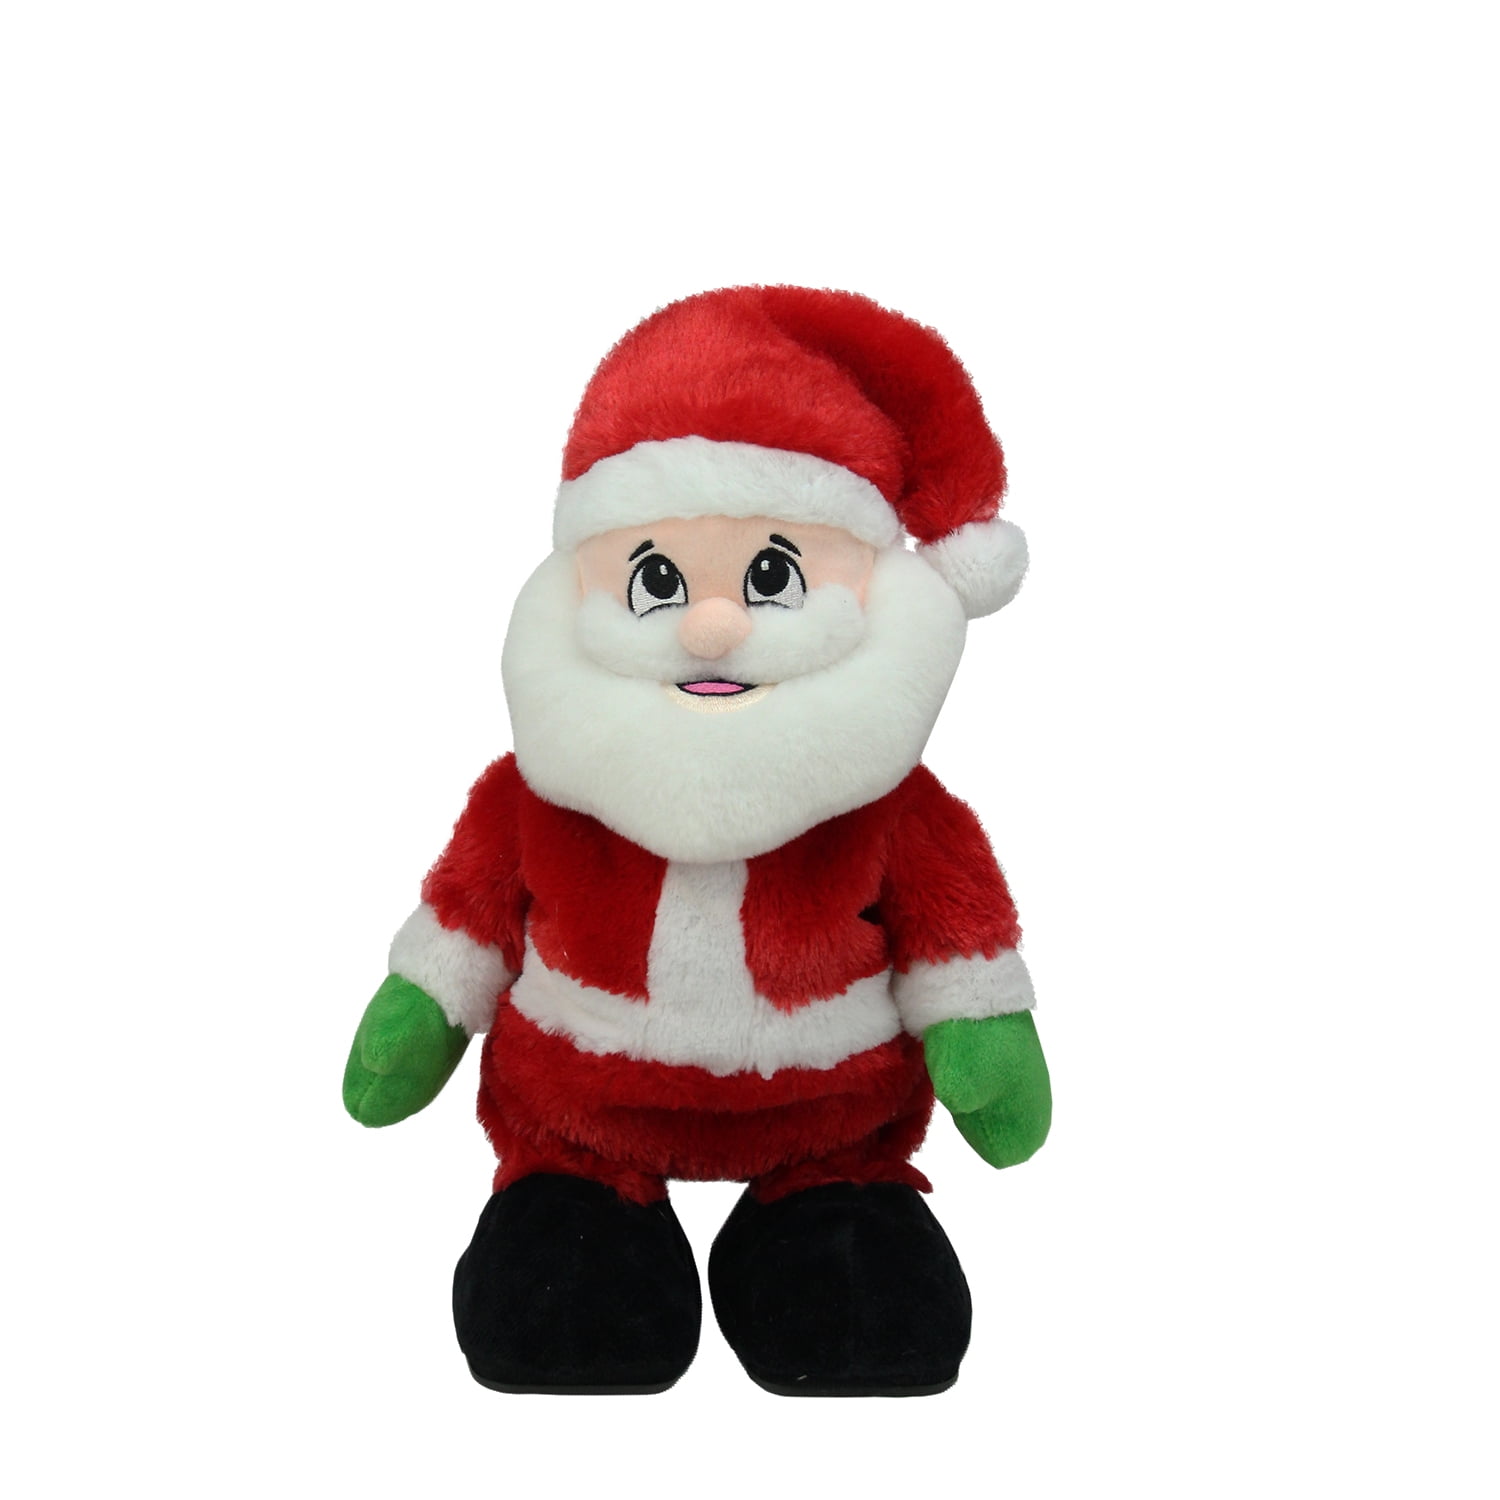 Pack Of 6 Animated Tickle N Laugh Santa Claus Plush Christmas Figures